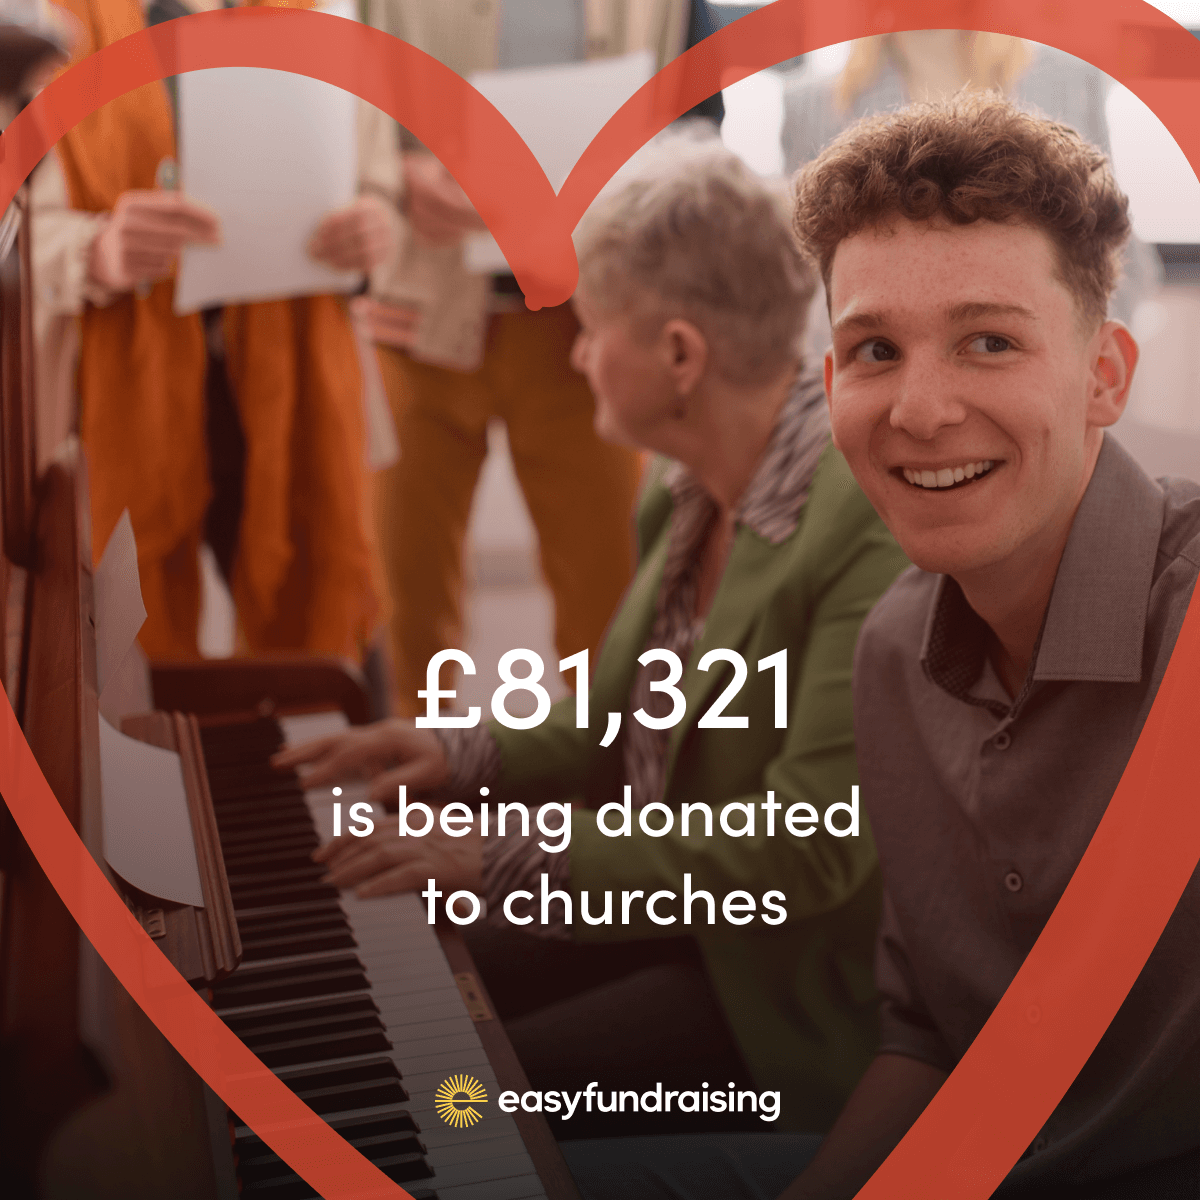 Congratulation to all the churches in @DioManchester  that have just received a share of £81k in easyfundraising donations! To be a part of the next #DonationDay in May, register your church with easyfundraising for free today at easyfundraising.org.uk/diocese-of-man… 

#OnlineShopping #Church